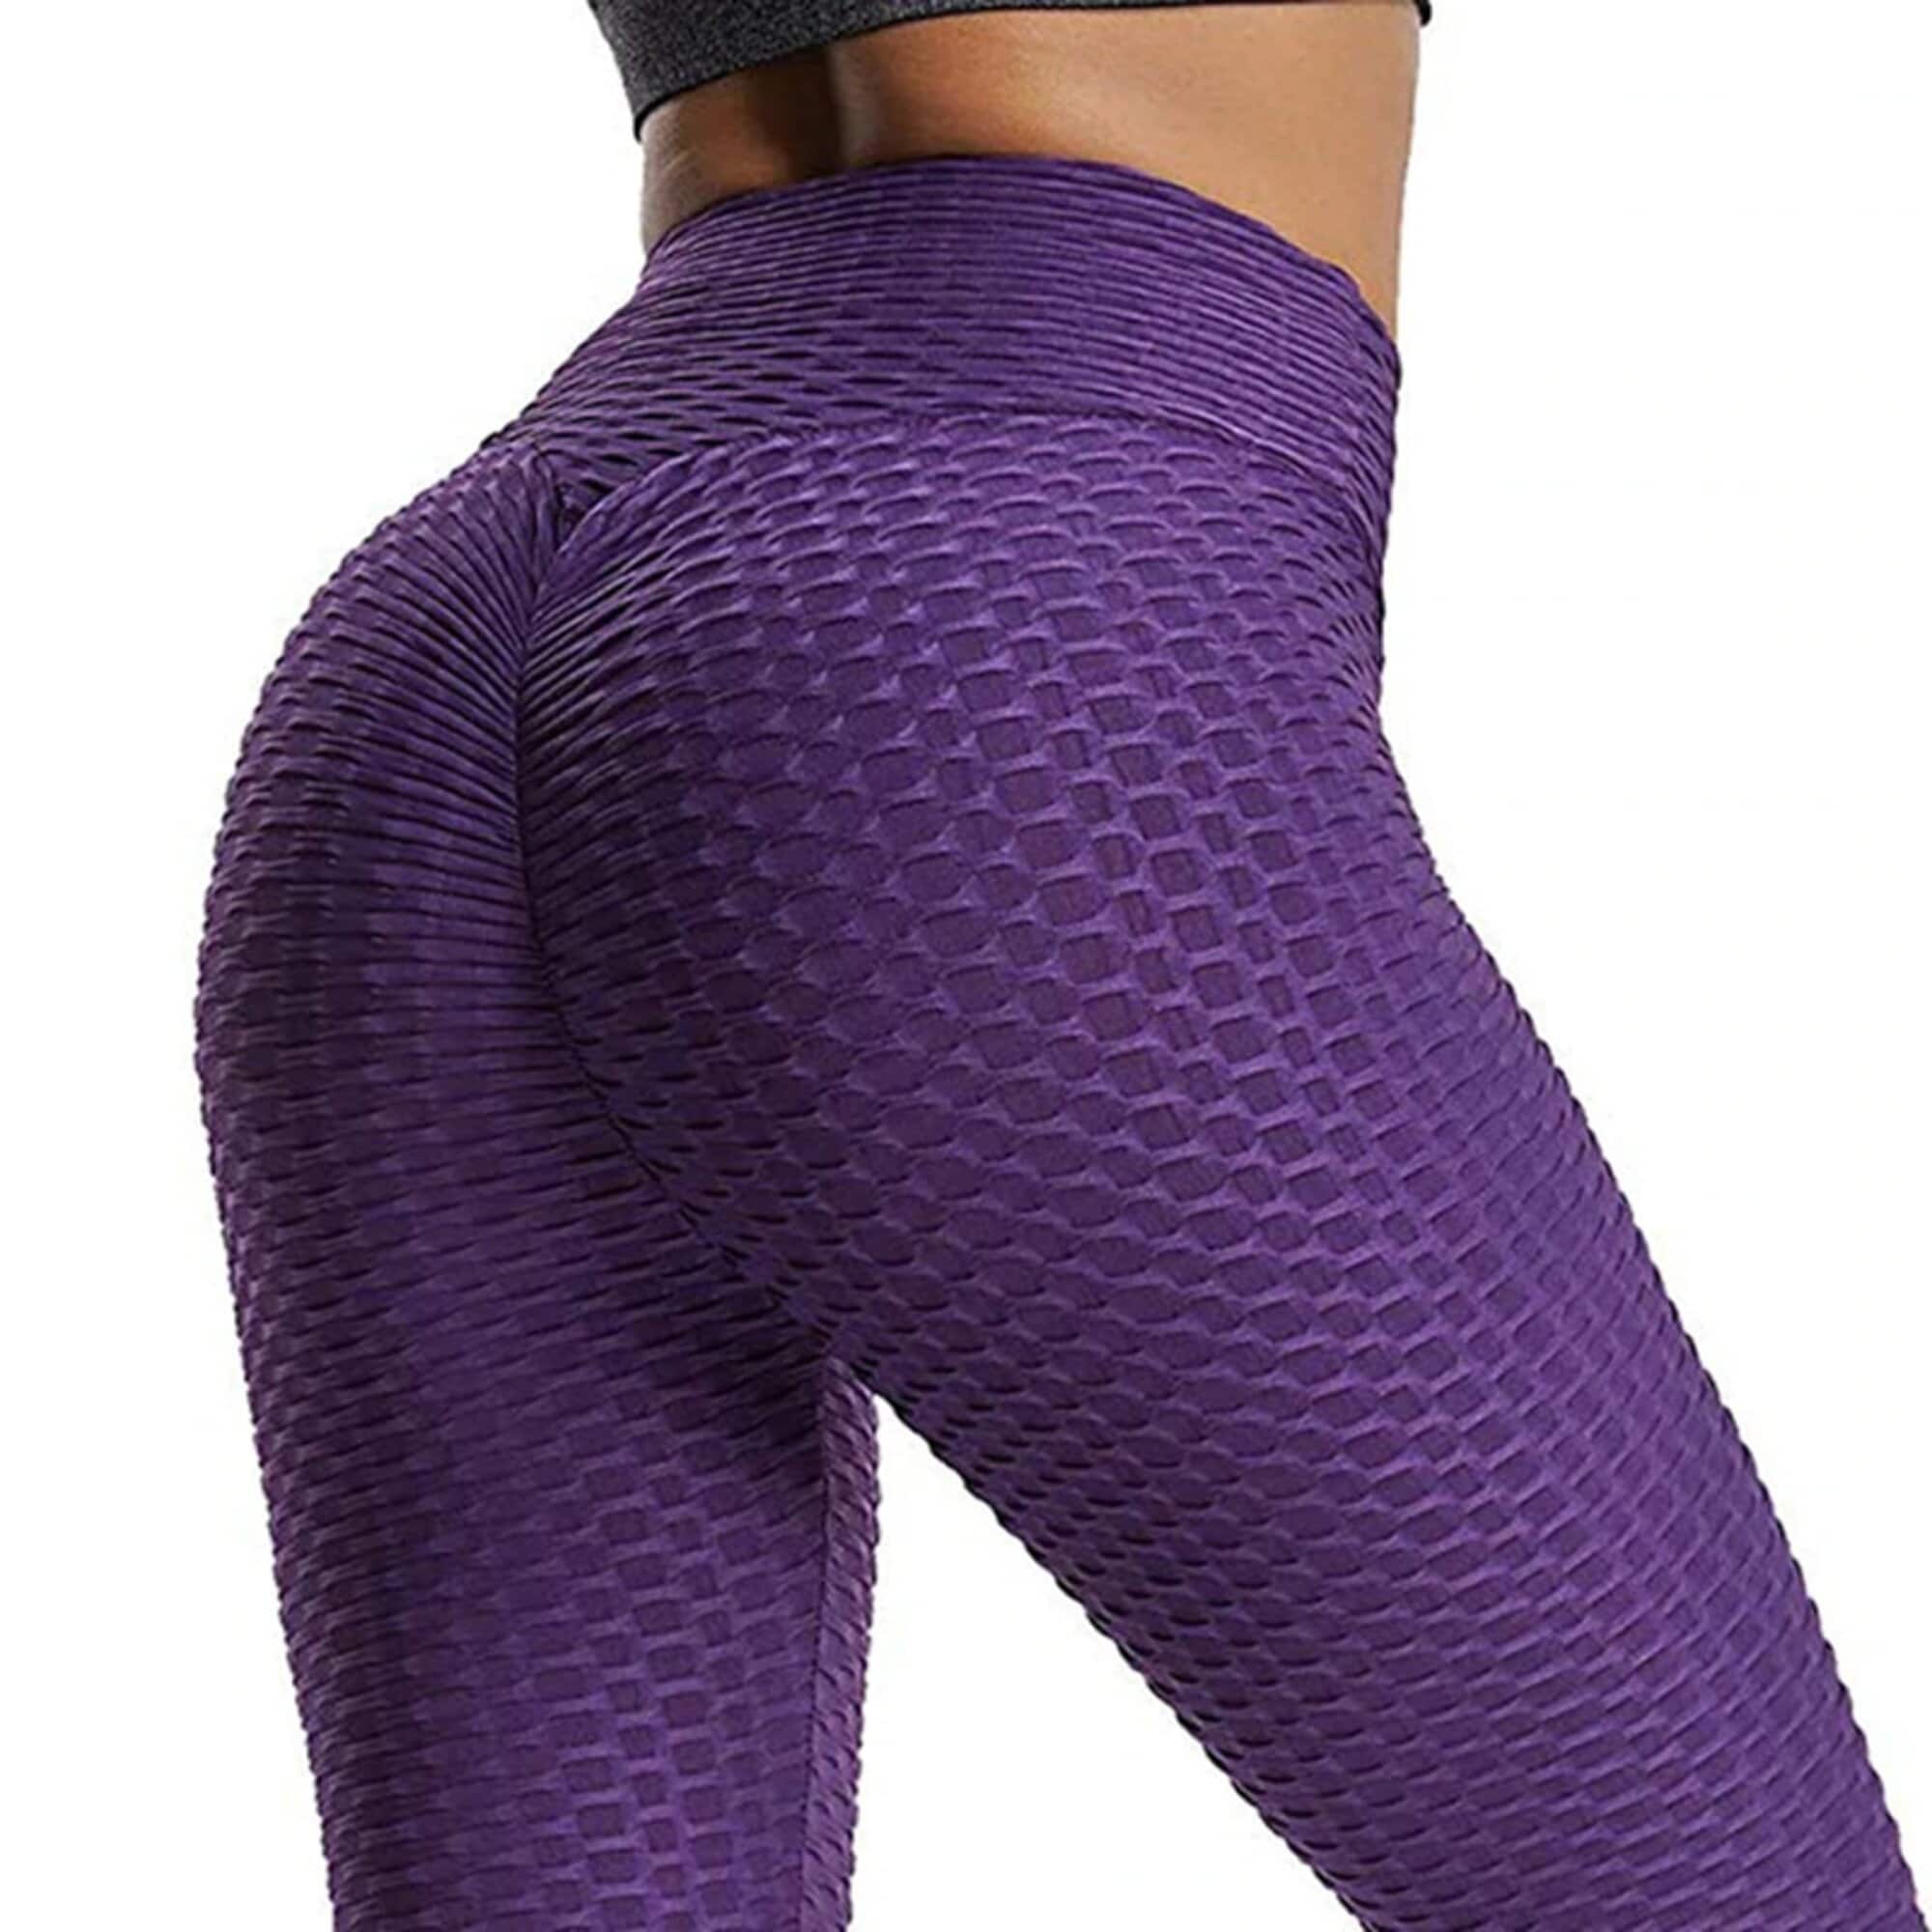 Sport Leggings Push Up Popsicle  International Society of Precision  Agriculture